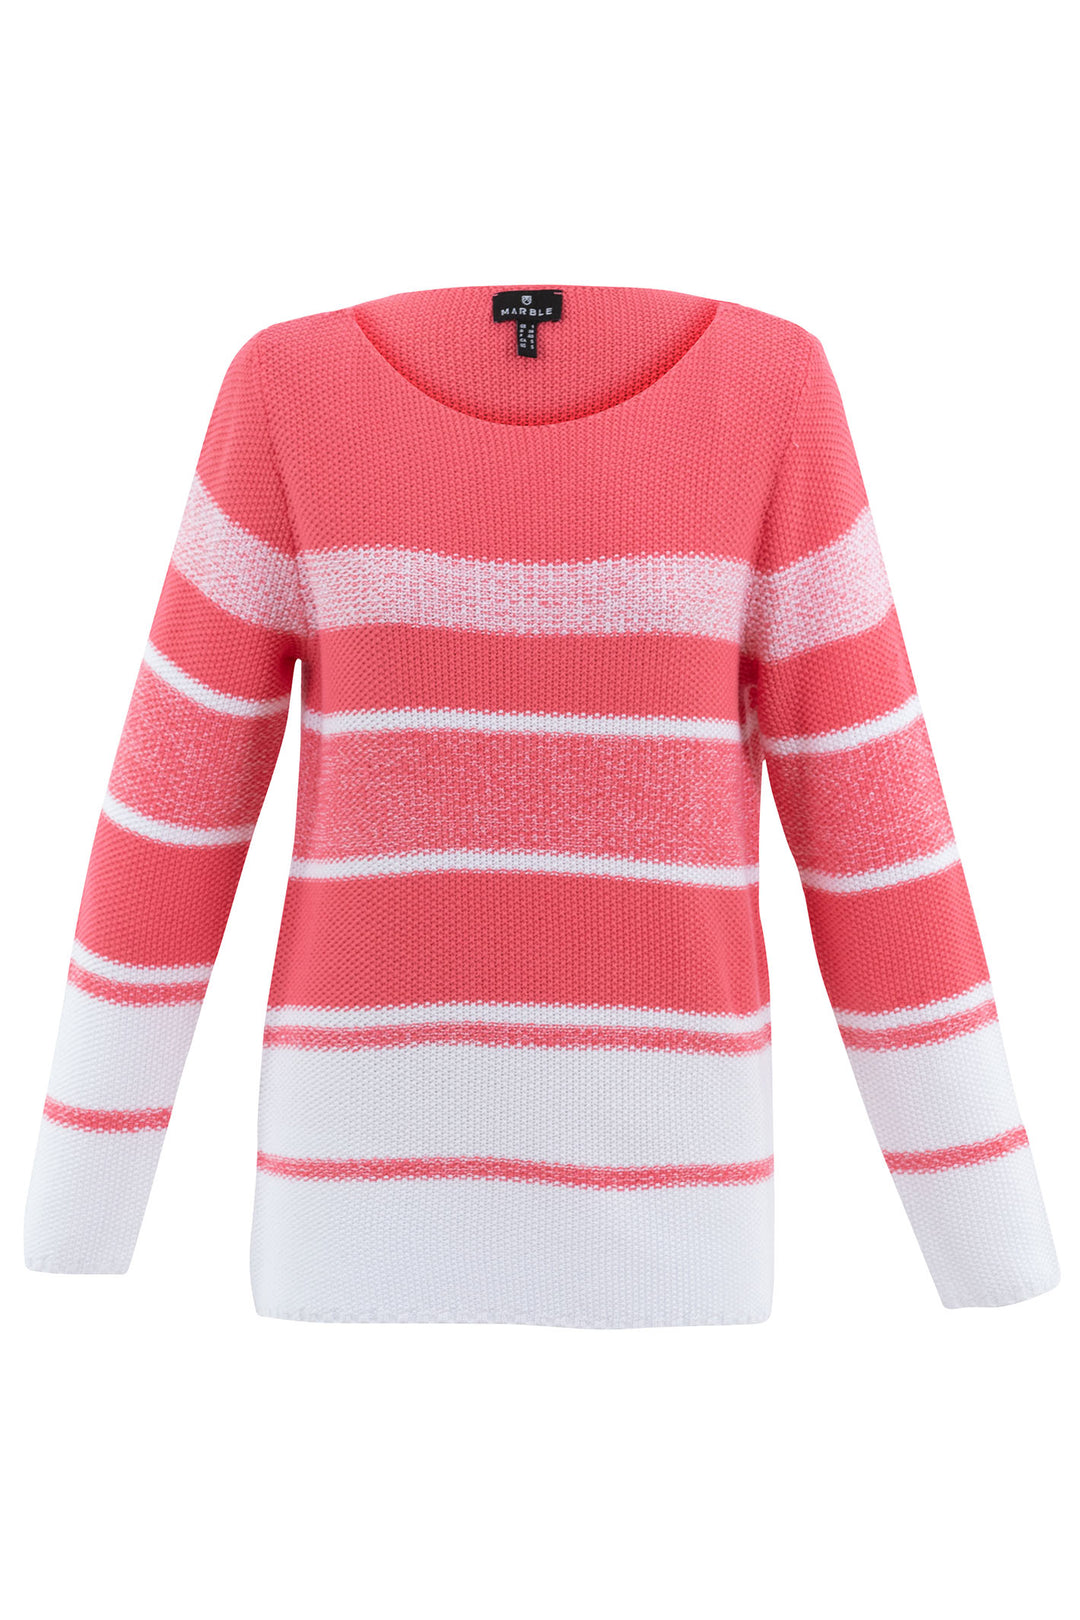 Marble Fashions 7445 135 Pink Stripe Wide Neck Jumper - Experience Boutique